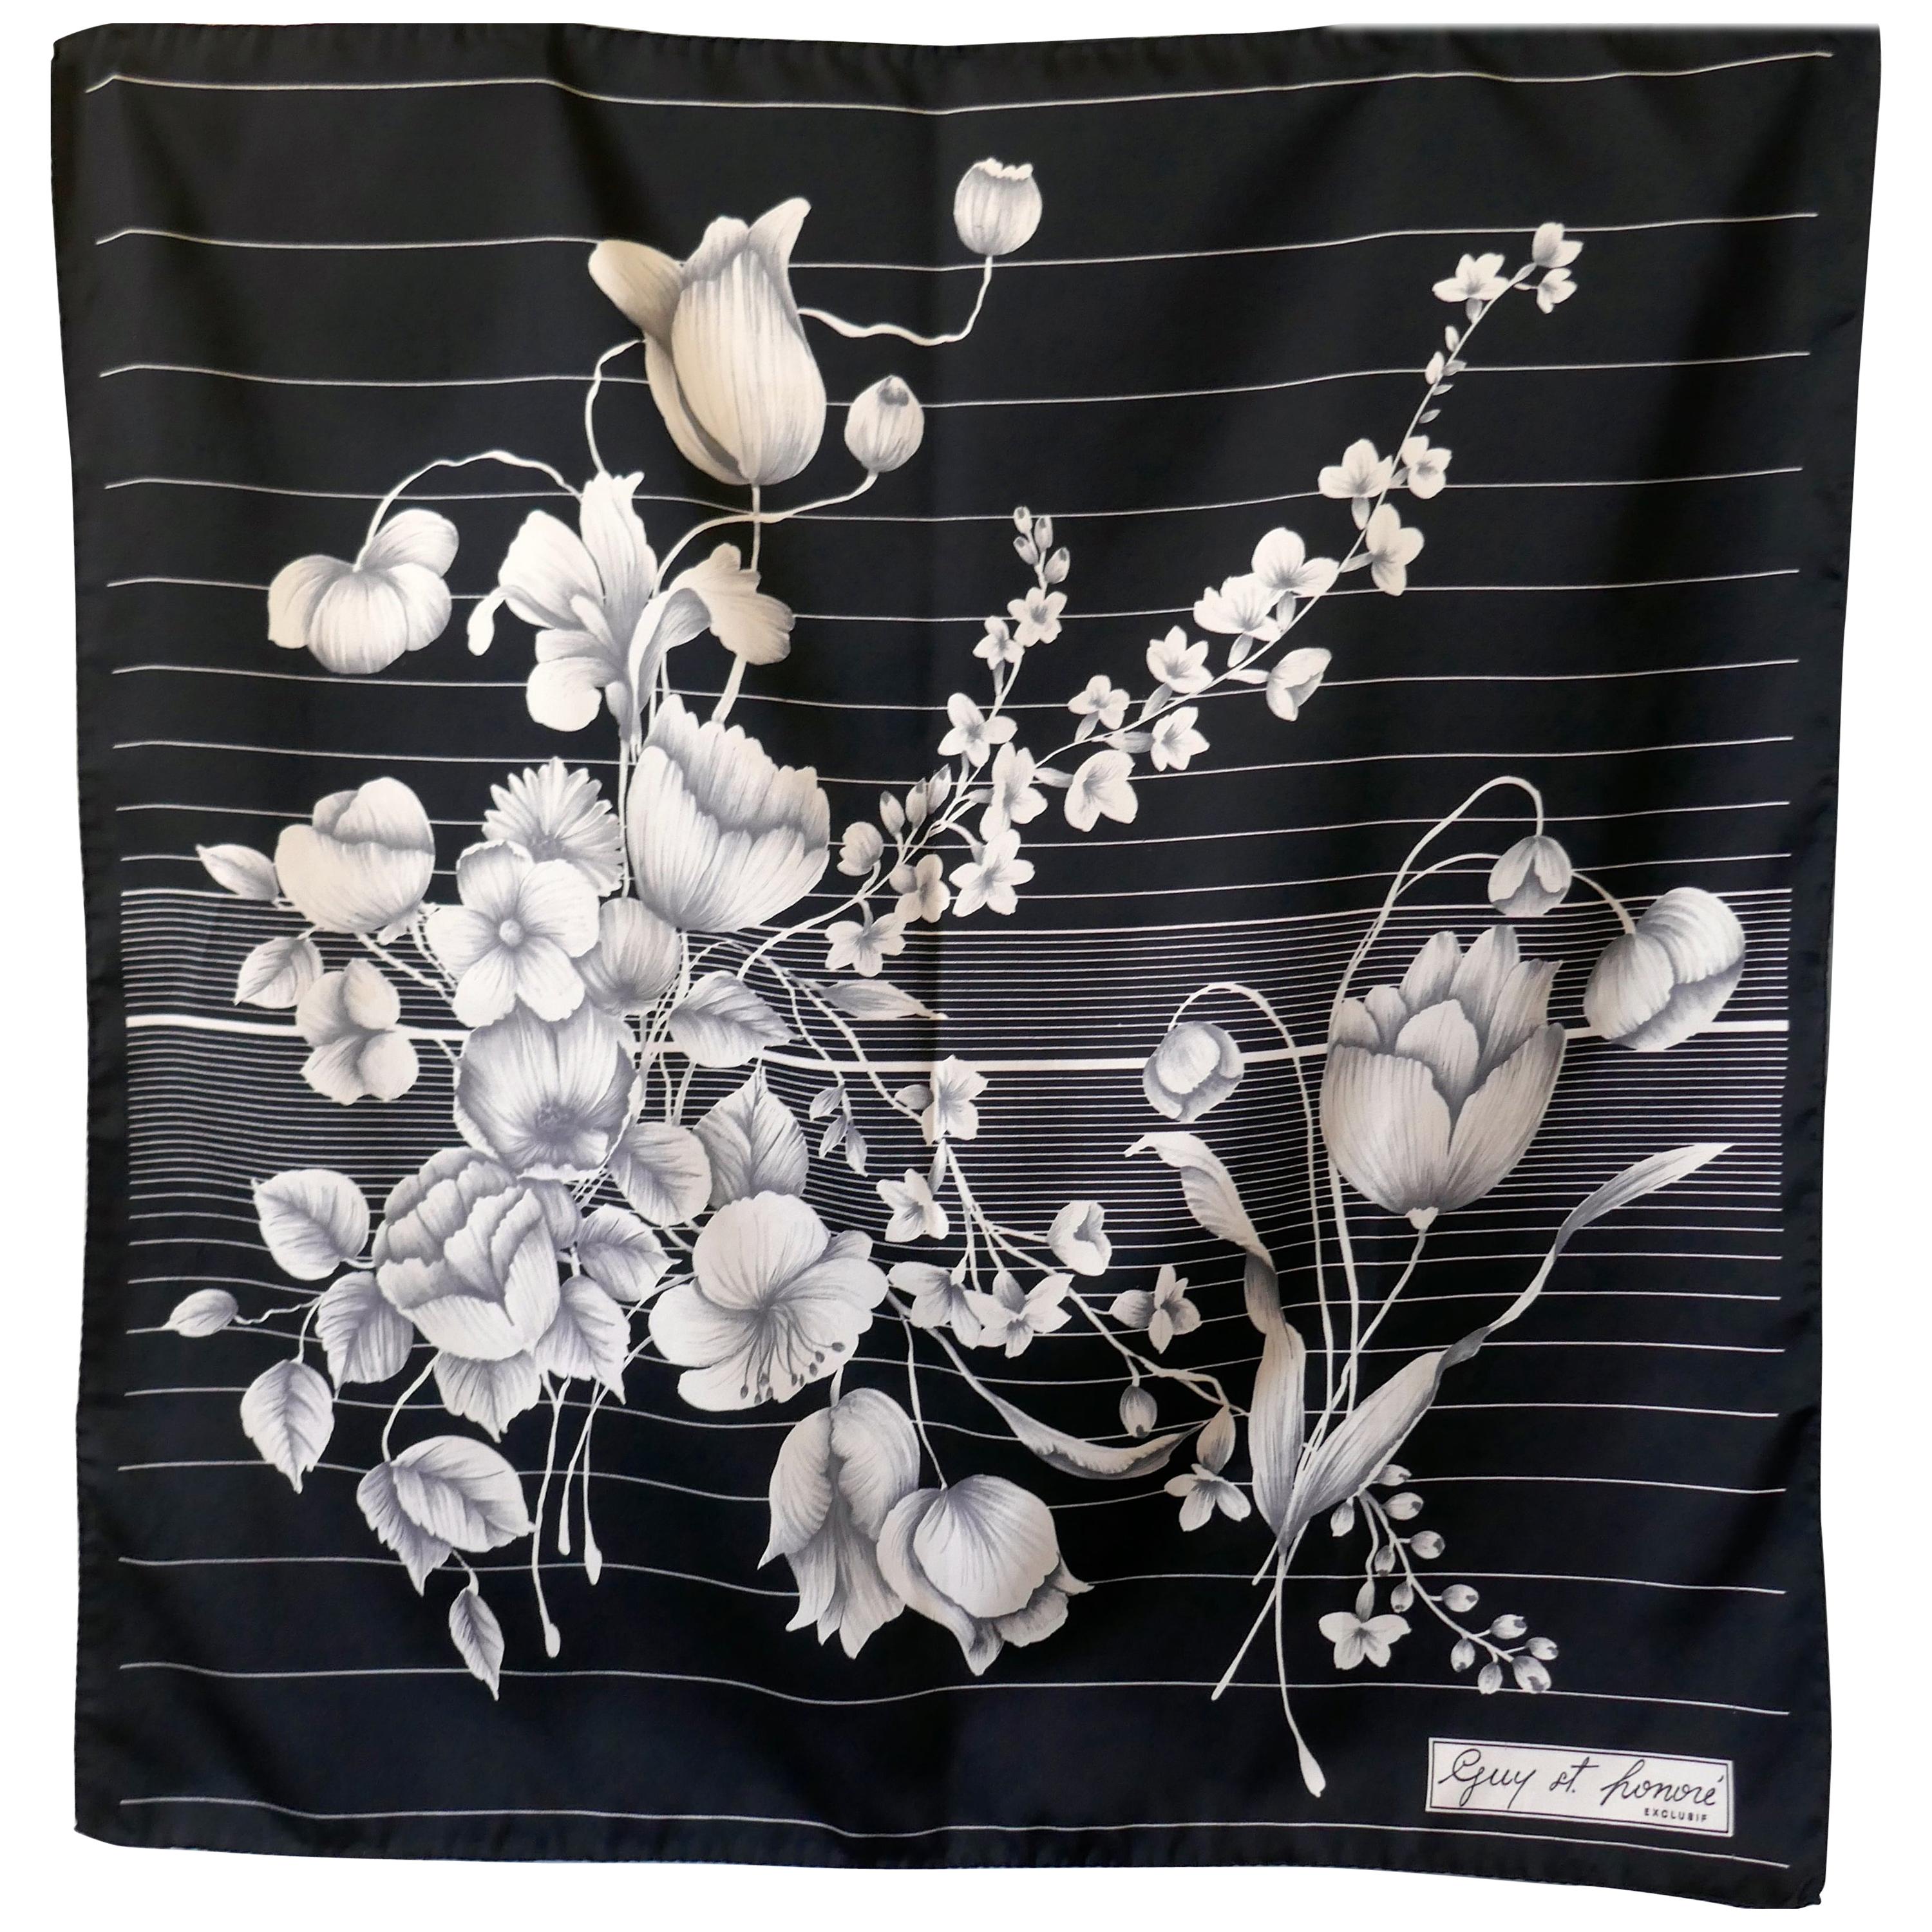 1970s Vintage Art Scarf, Chic Design in Black and White from Guy st. Honoré 